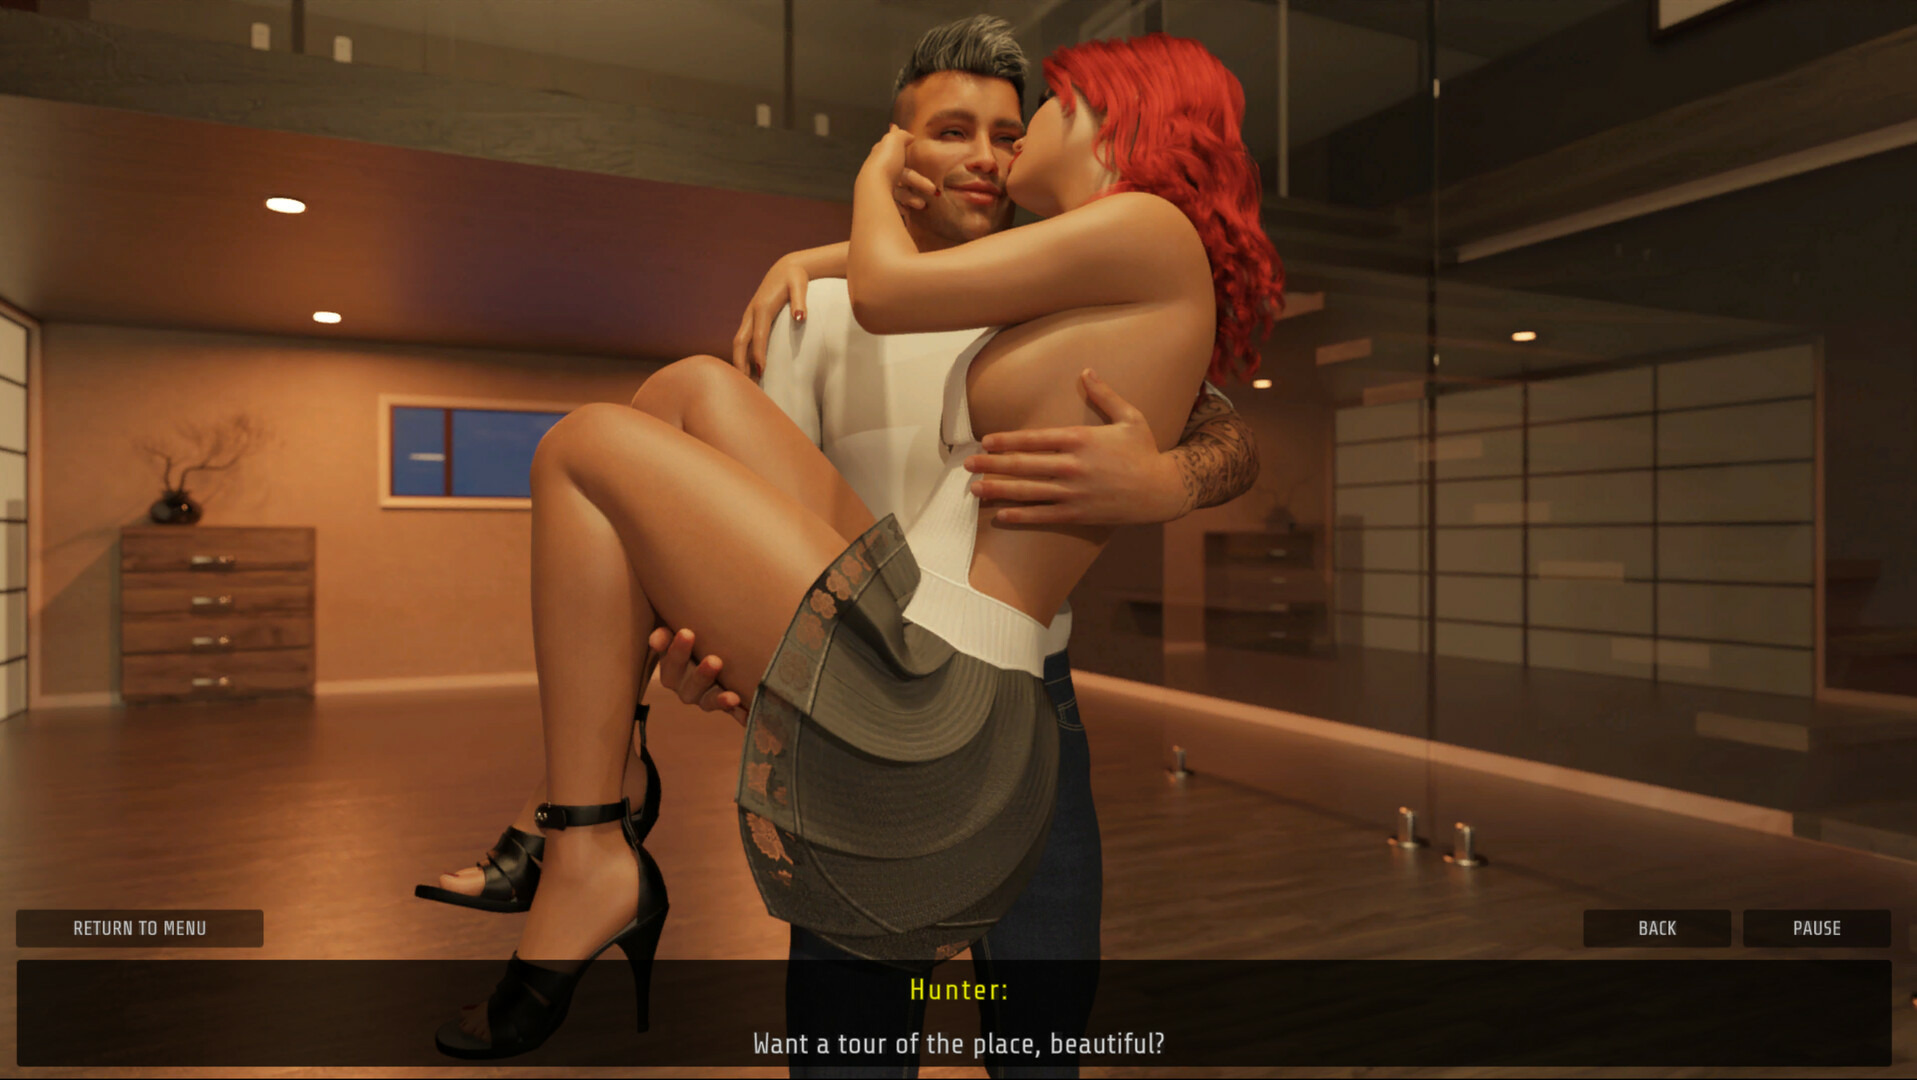 Sex Story - Ruby and Hunter - Episode 2 Steam CD Key 1.92$